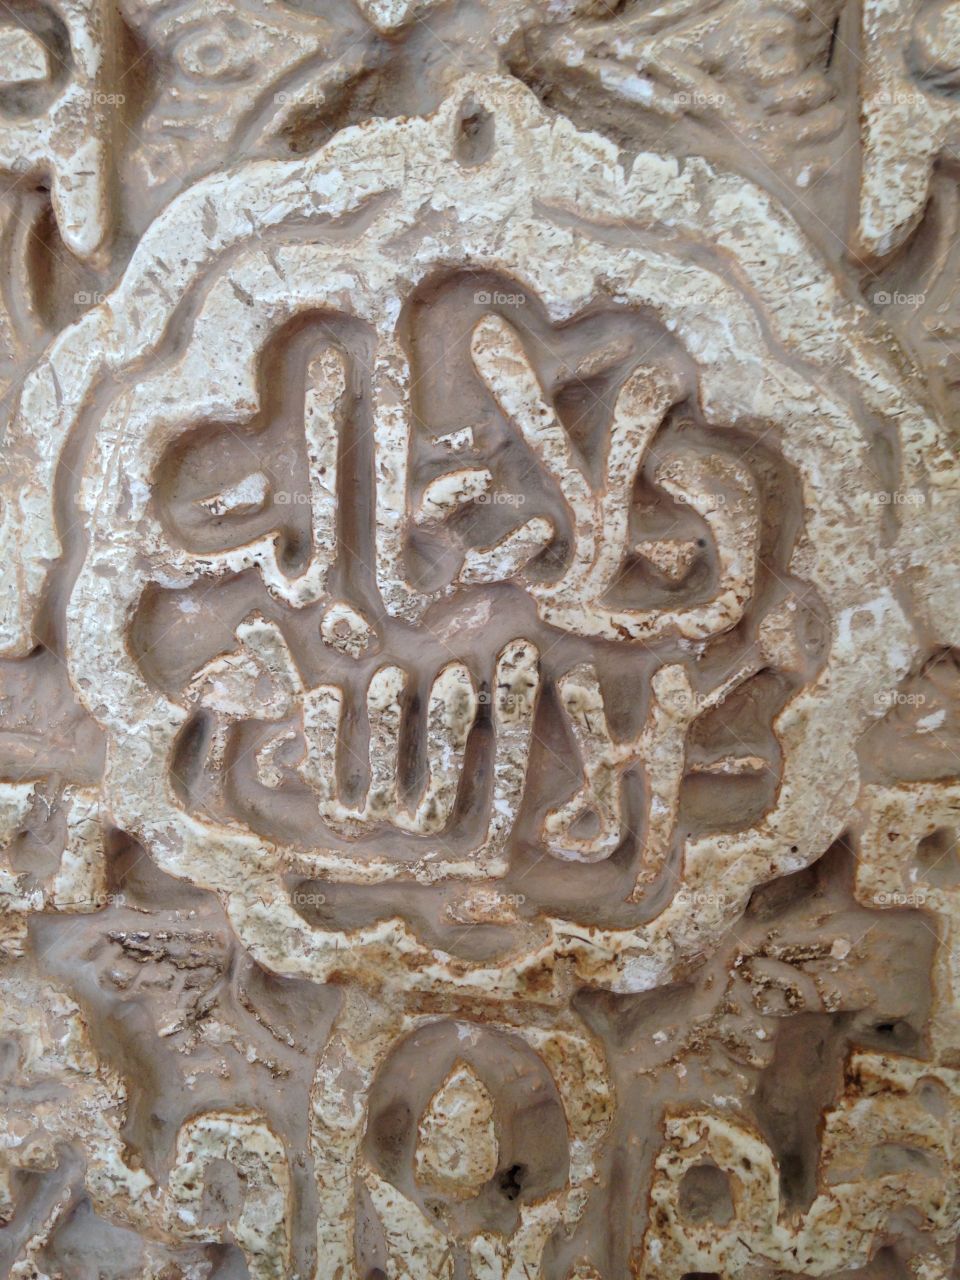 Arabic at Alhambra. Arabic script on a wall at the Alhambra in Granada, Spain